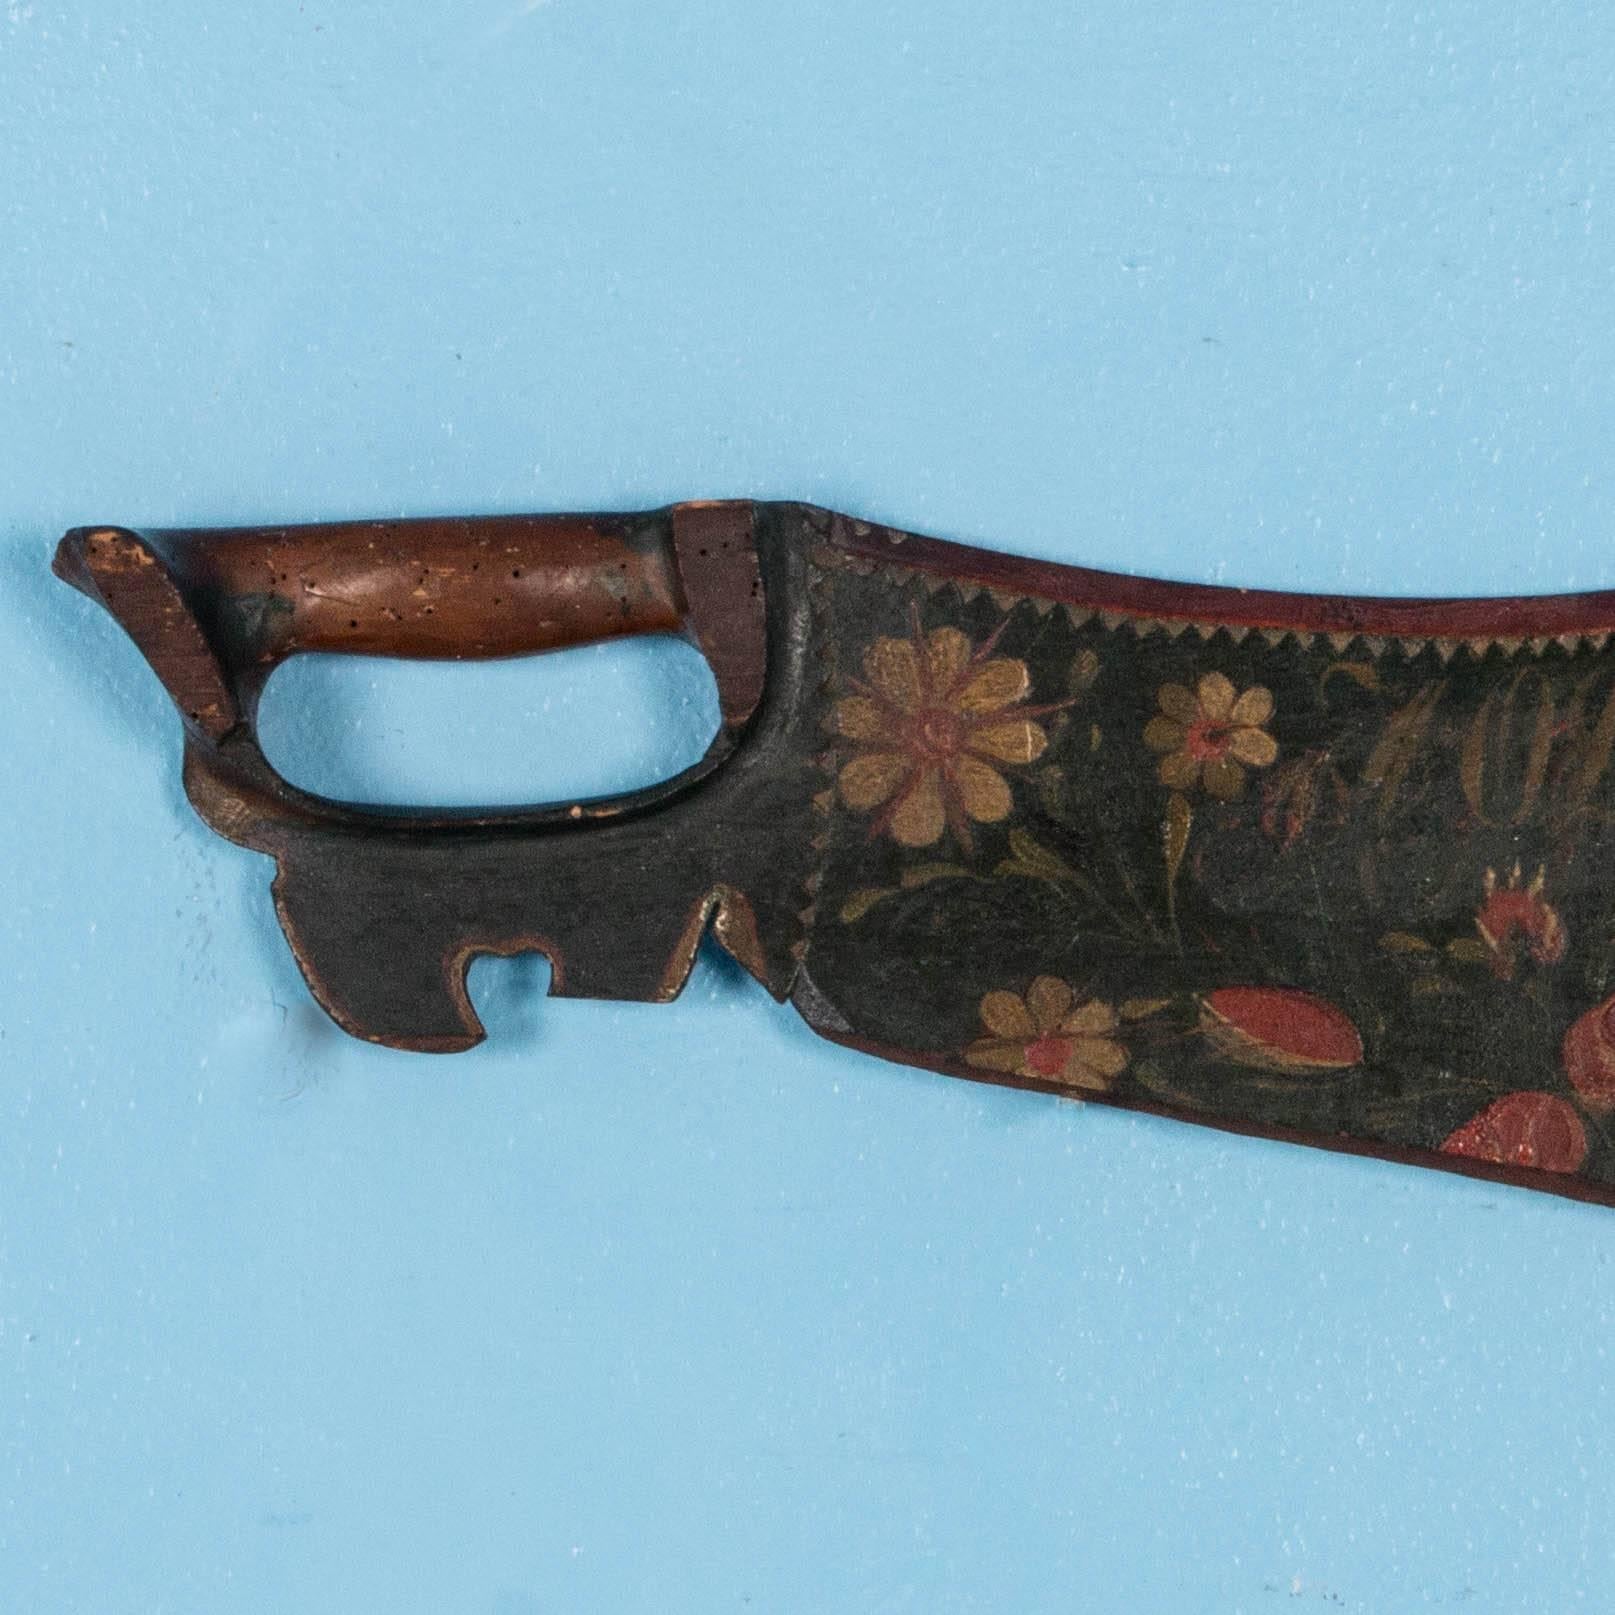 This hand-carved skaktetra was traditionally given away as a bridal gift, usually with beautiful painted decorations and often dated. This one has the bride's initials and is dated 1849 with red and yellow flowers on a dark blue / black background.